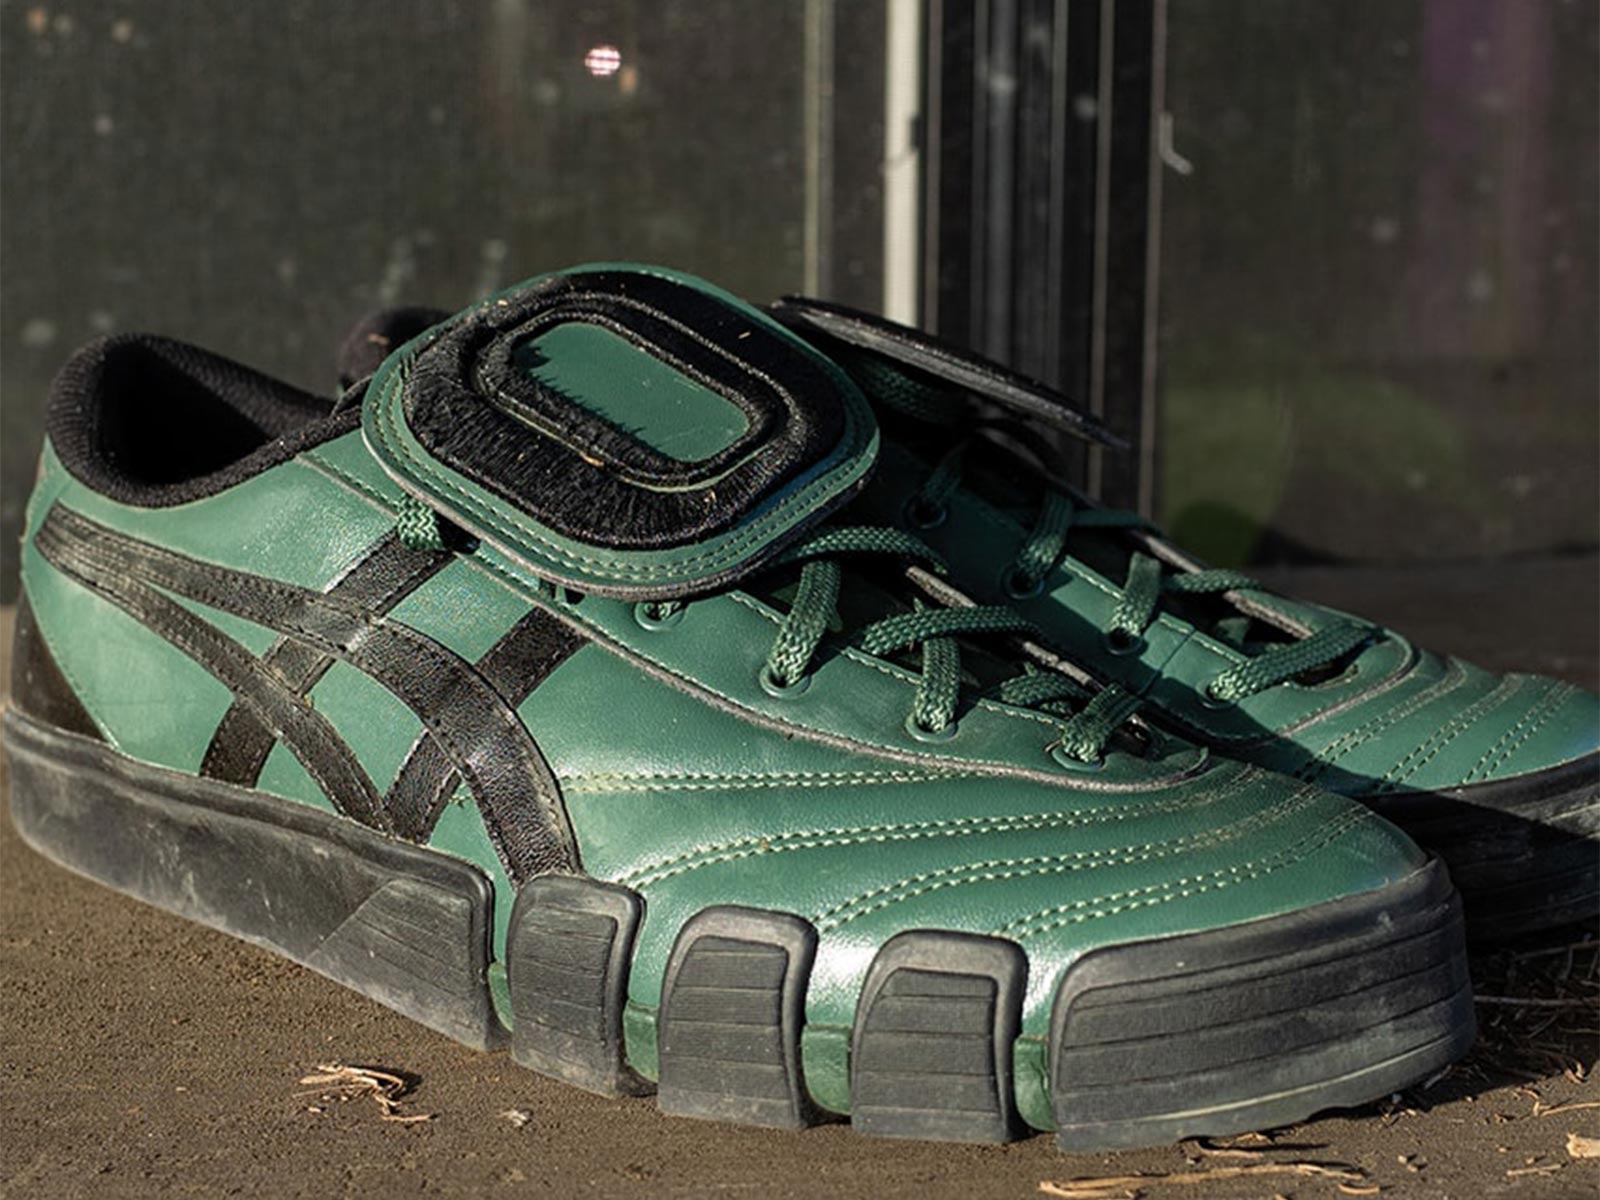 ASICS GEL-FLEXKEE 958 by Kiko Kostadinov: Sold out in a matter of